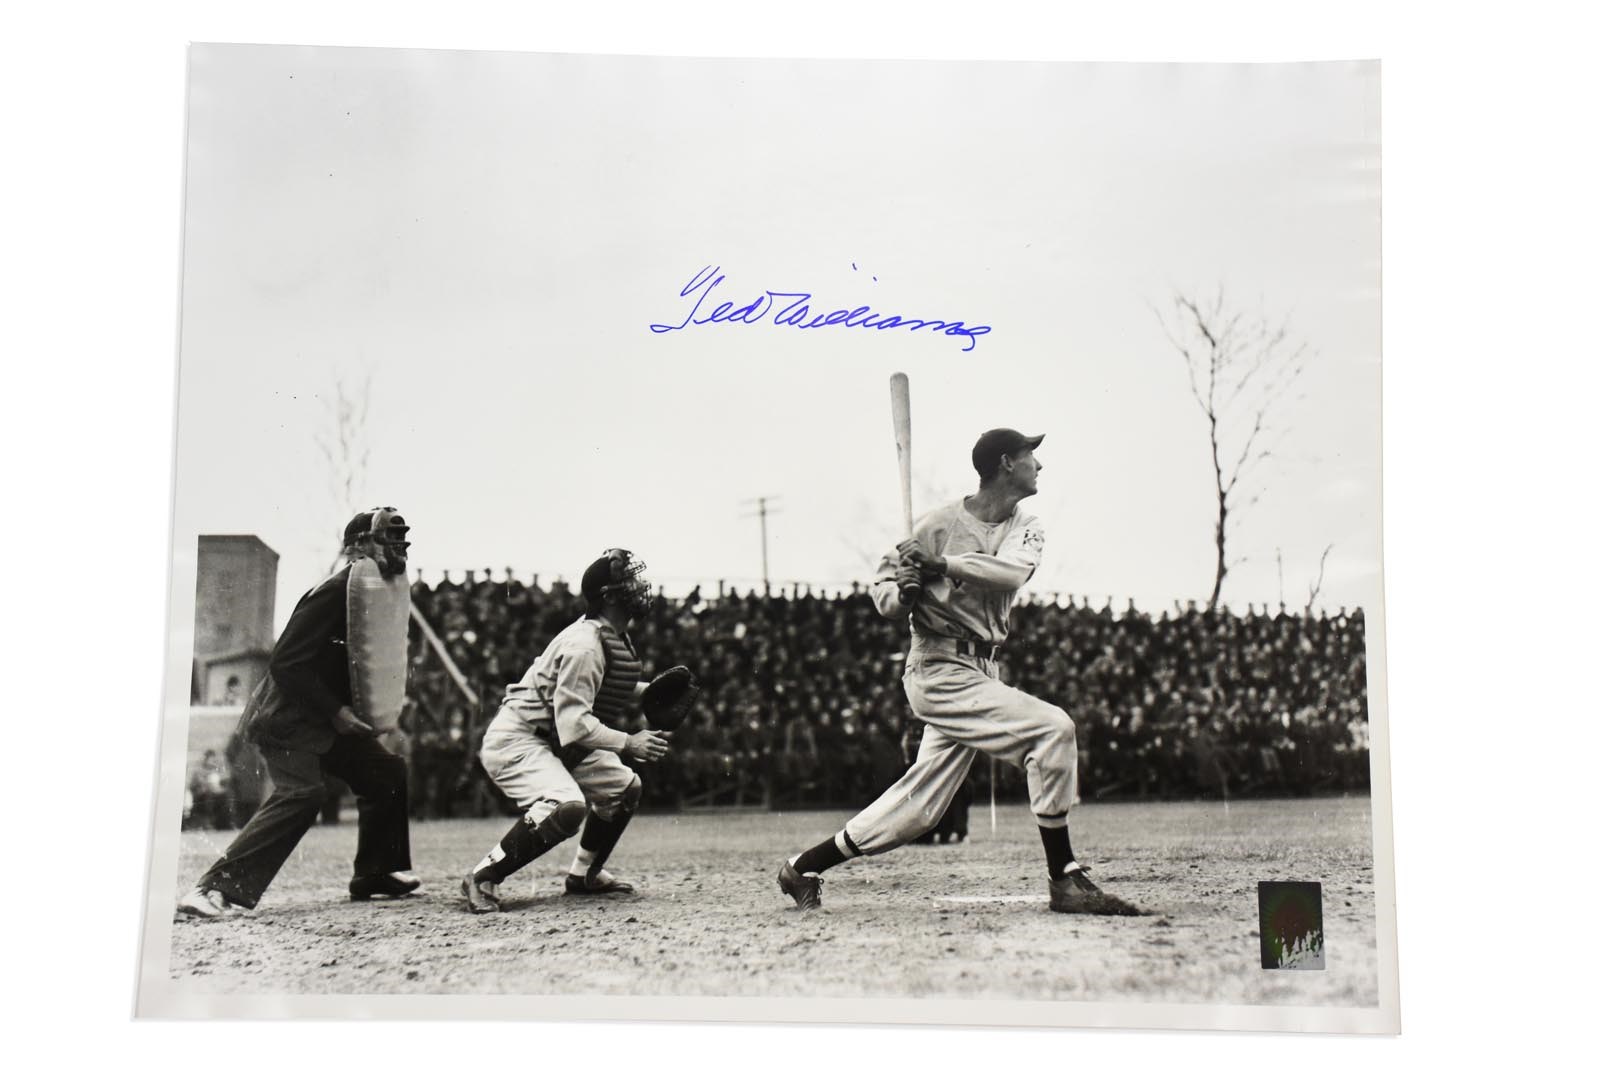 Ted Williams "First Home Run" Signed Photo